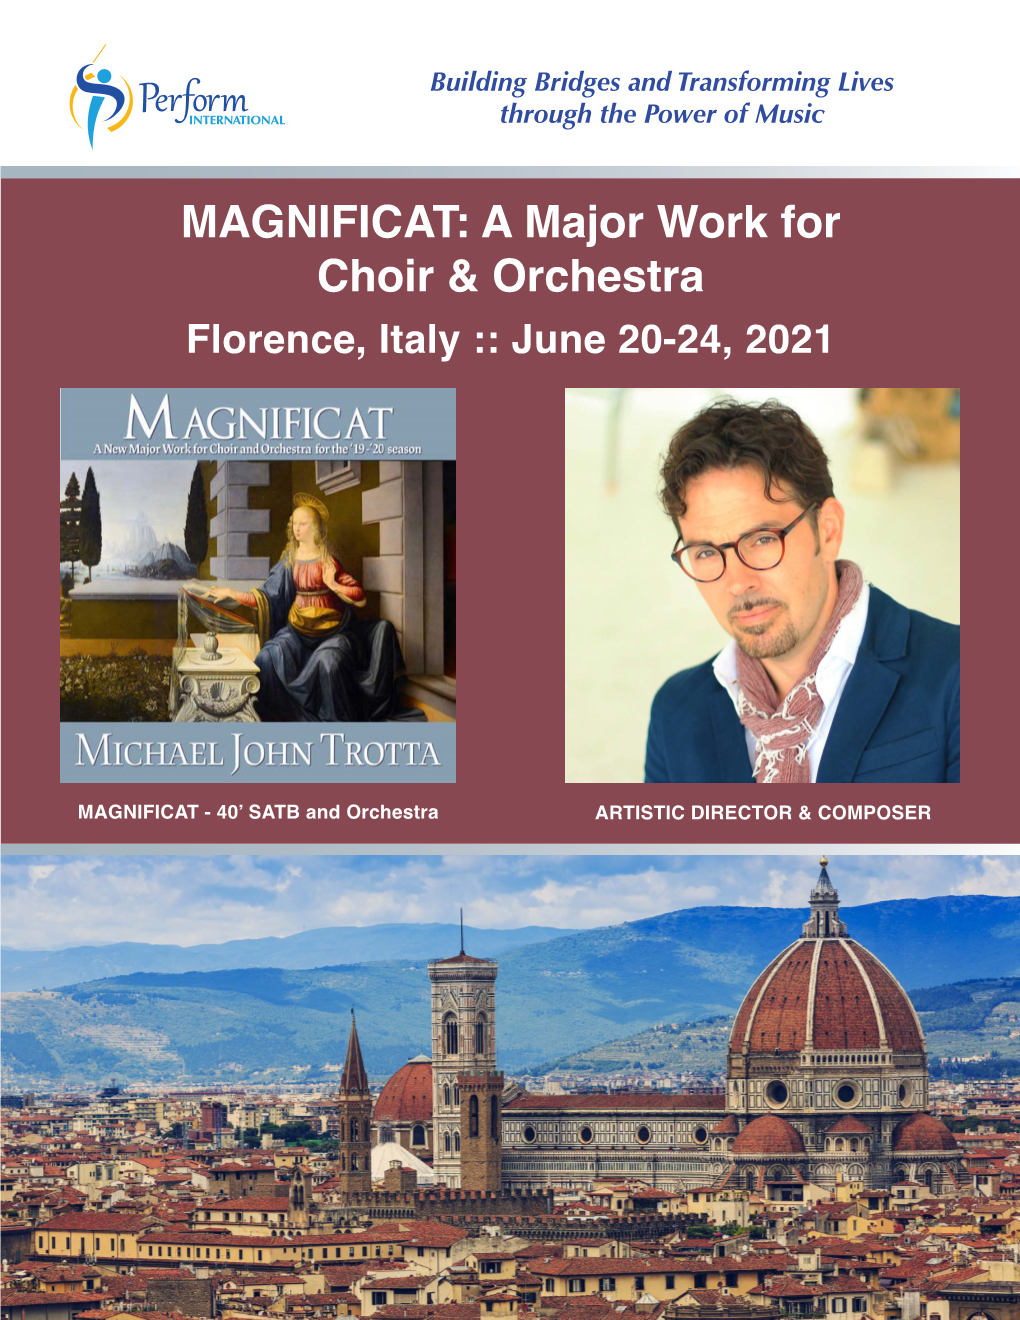 MAGNIFICAT: a Major Work for Choir & Orchestra